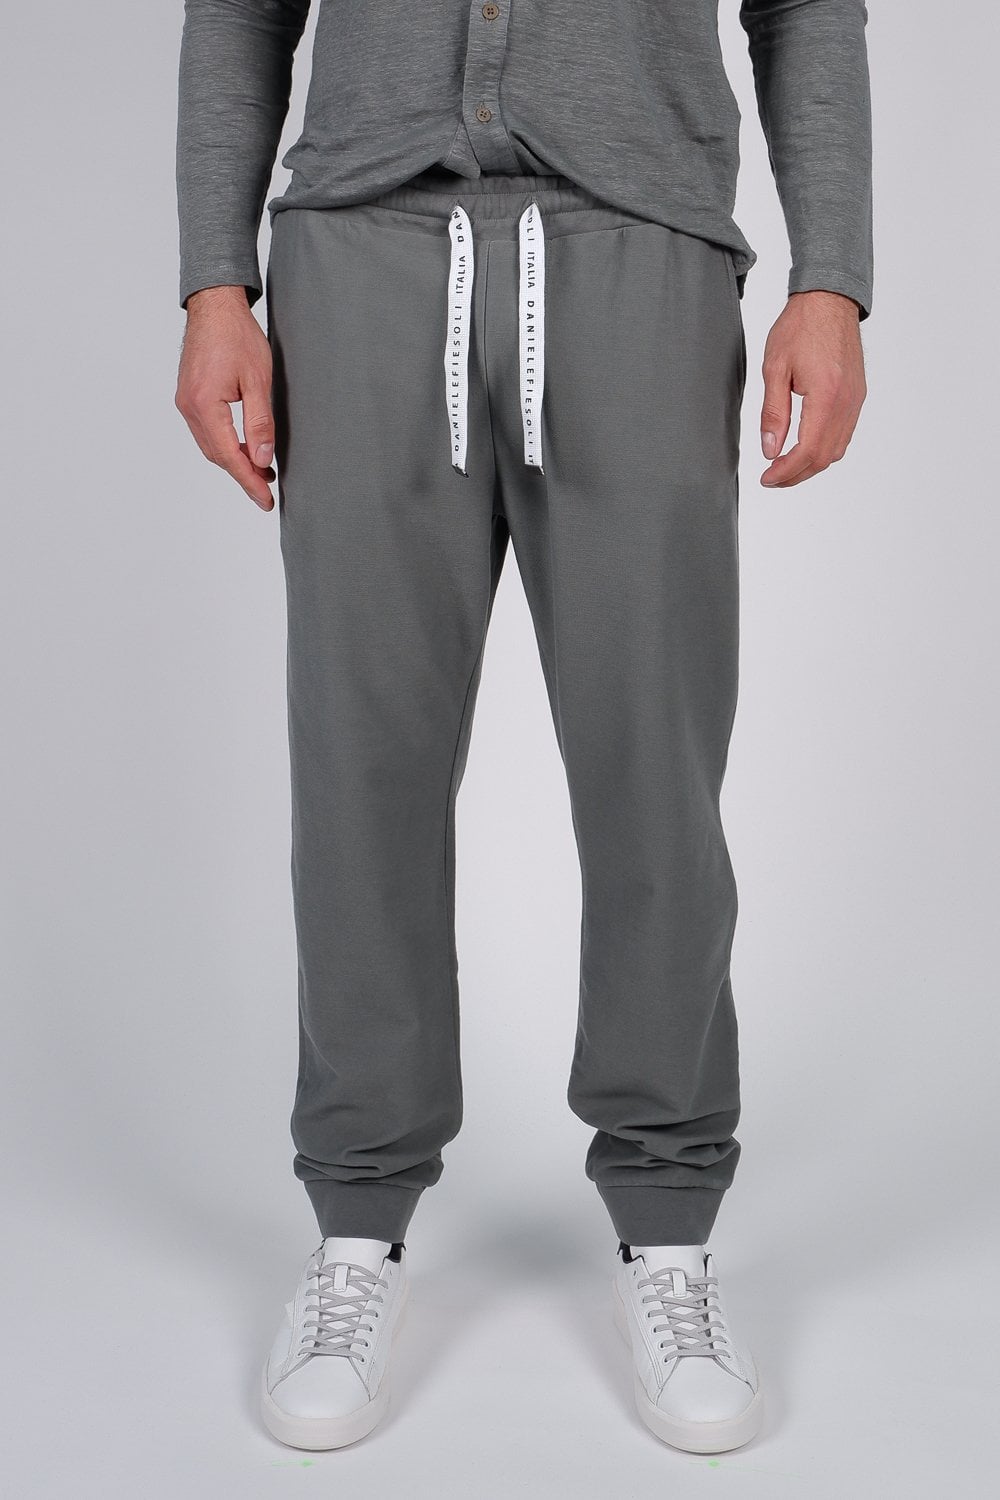 Buy the Daniele Fiesoli Eco-Friendly Jersey Joggers in Grey at Intro. Spend £50 for free UK delivery. Official stockists. We ship worldwide.